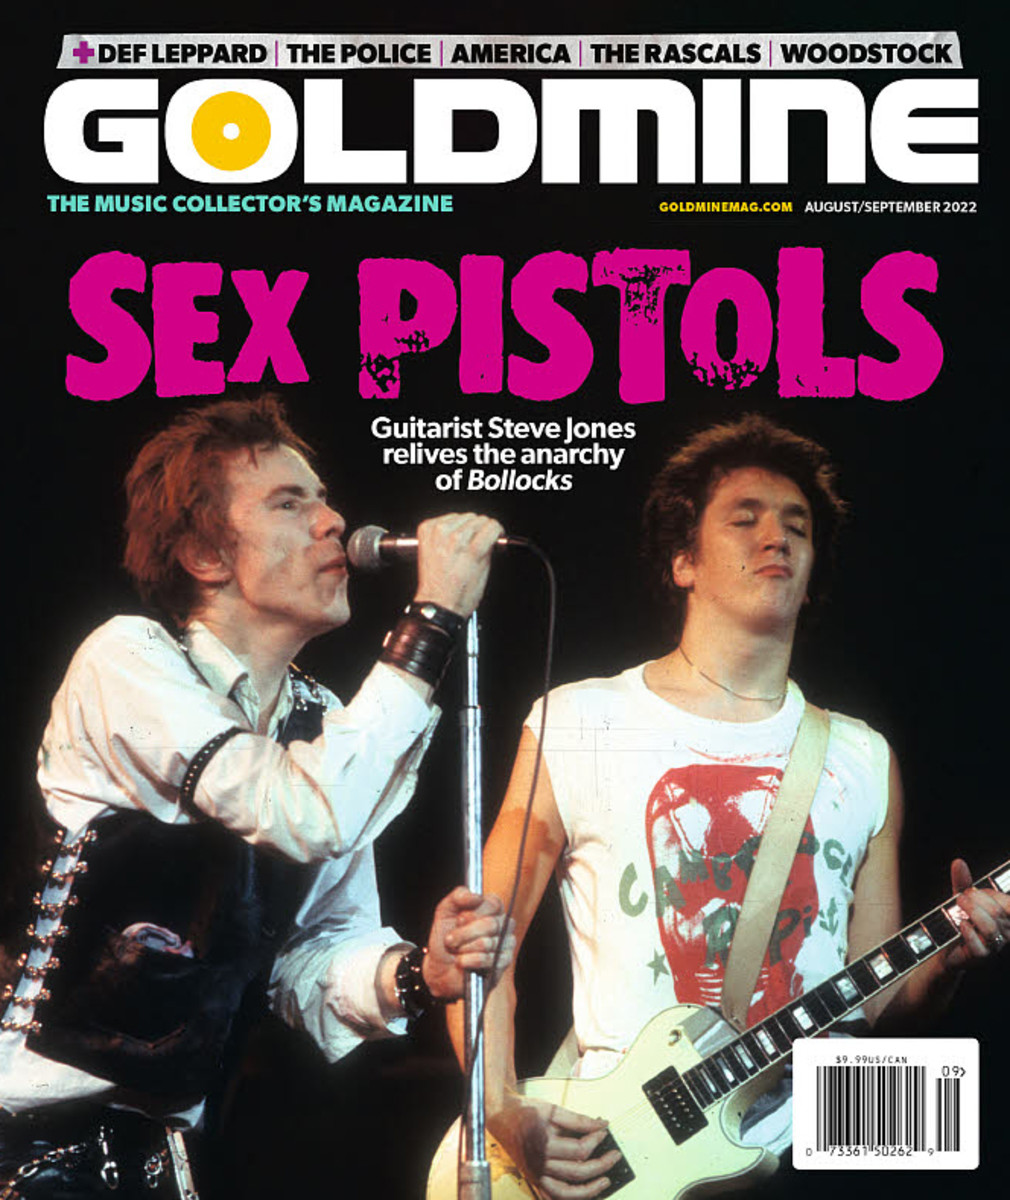 Sex Pistols cover of the Aug/Sept 2022 issue of Goldmine